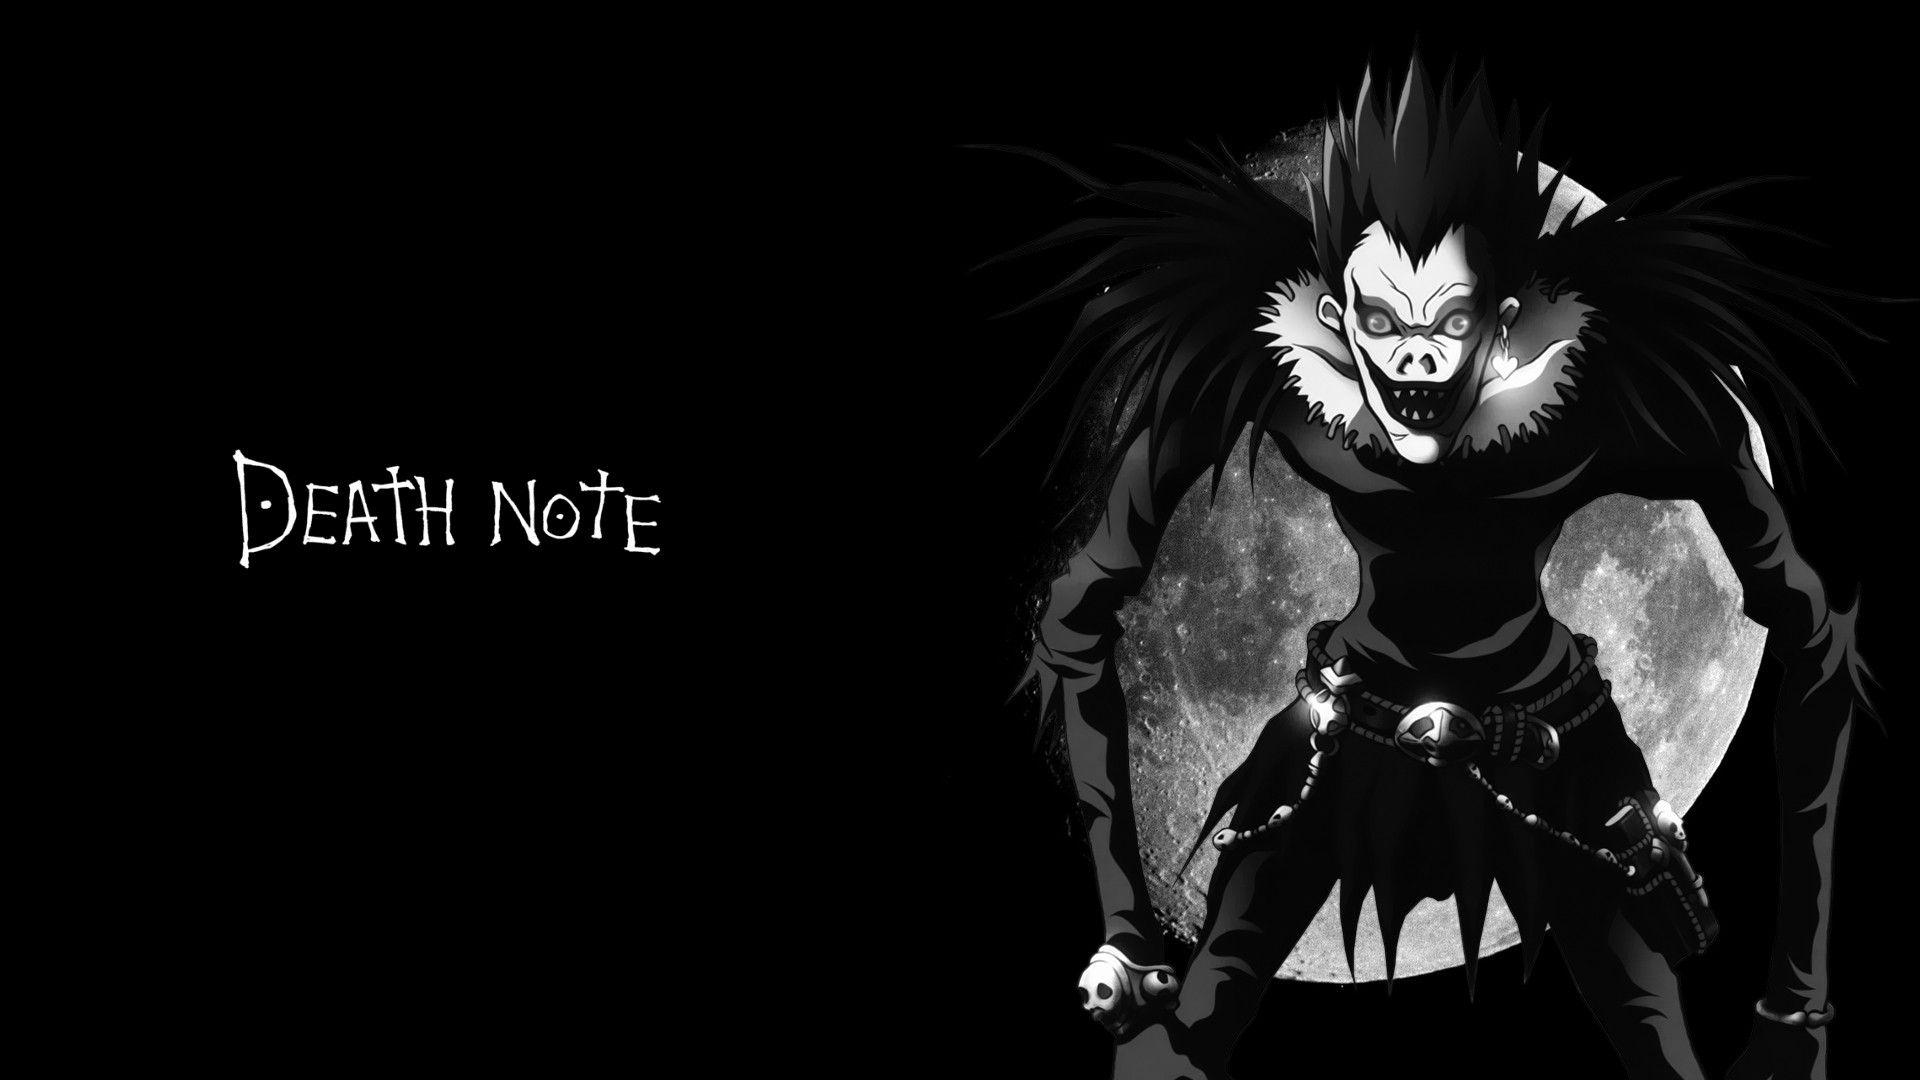 Death Note Ryuk Wallpapers Top Free Death Note Ryuk Backgrounds Wallpaperaccess Mobile abyss anime death note. death note ryuk wallpapers top free